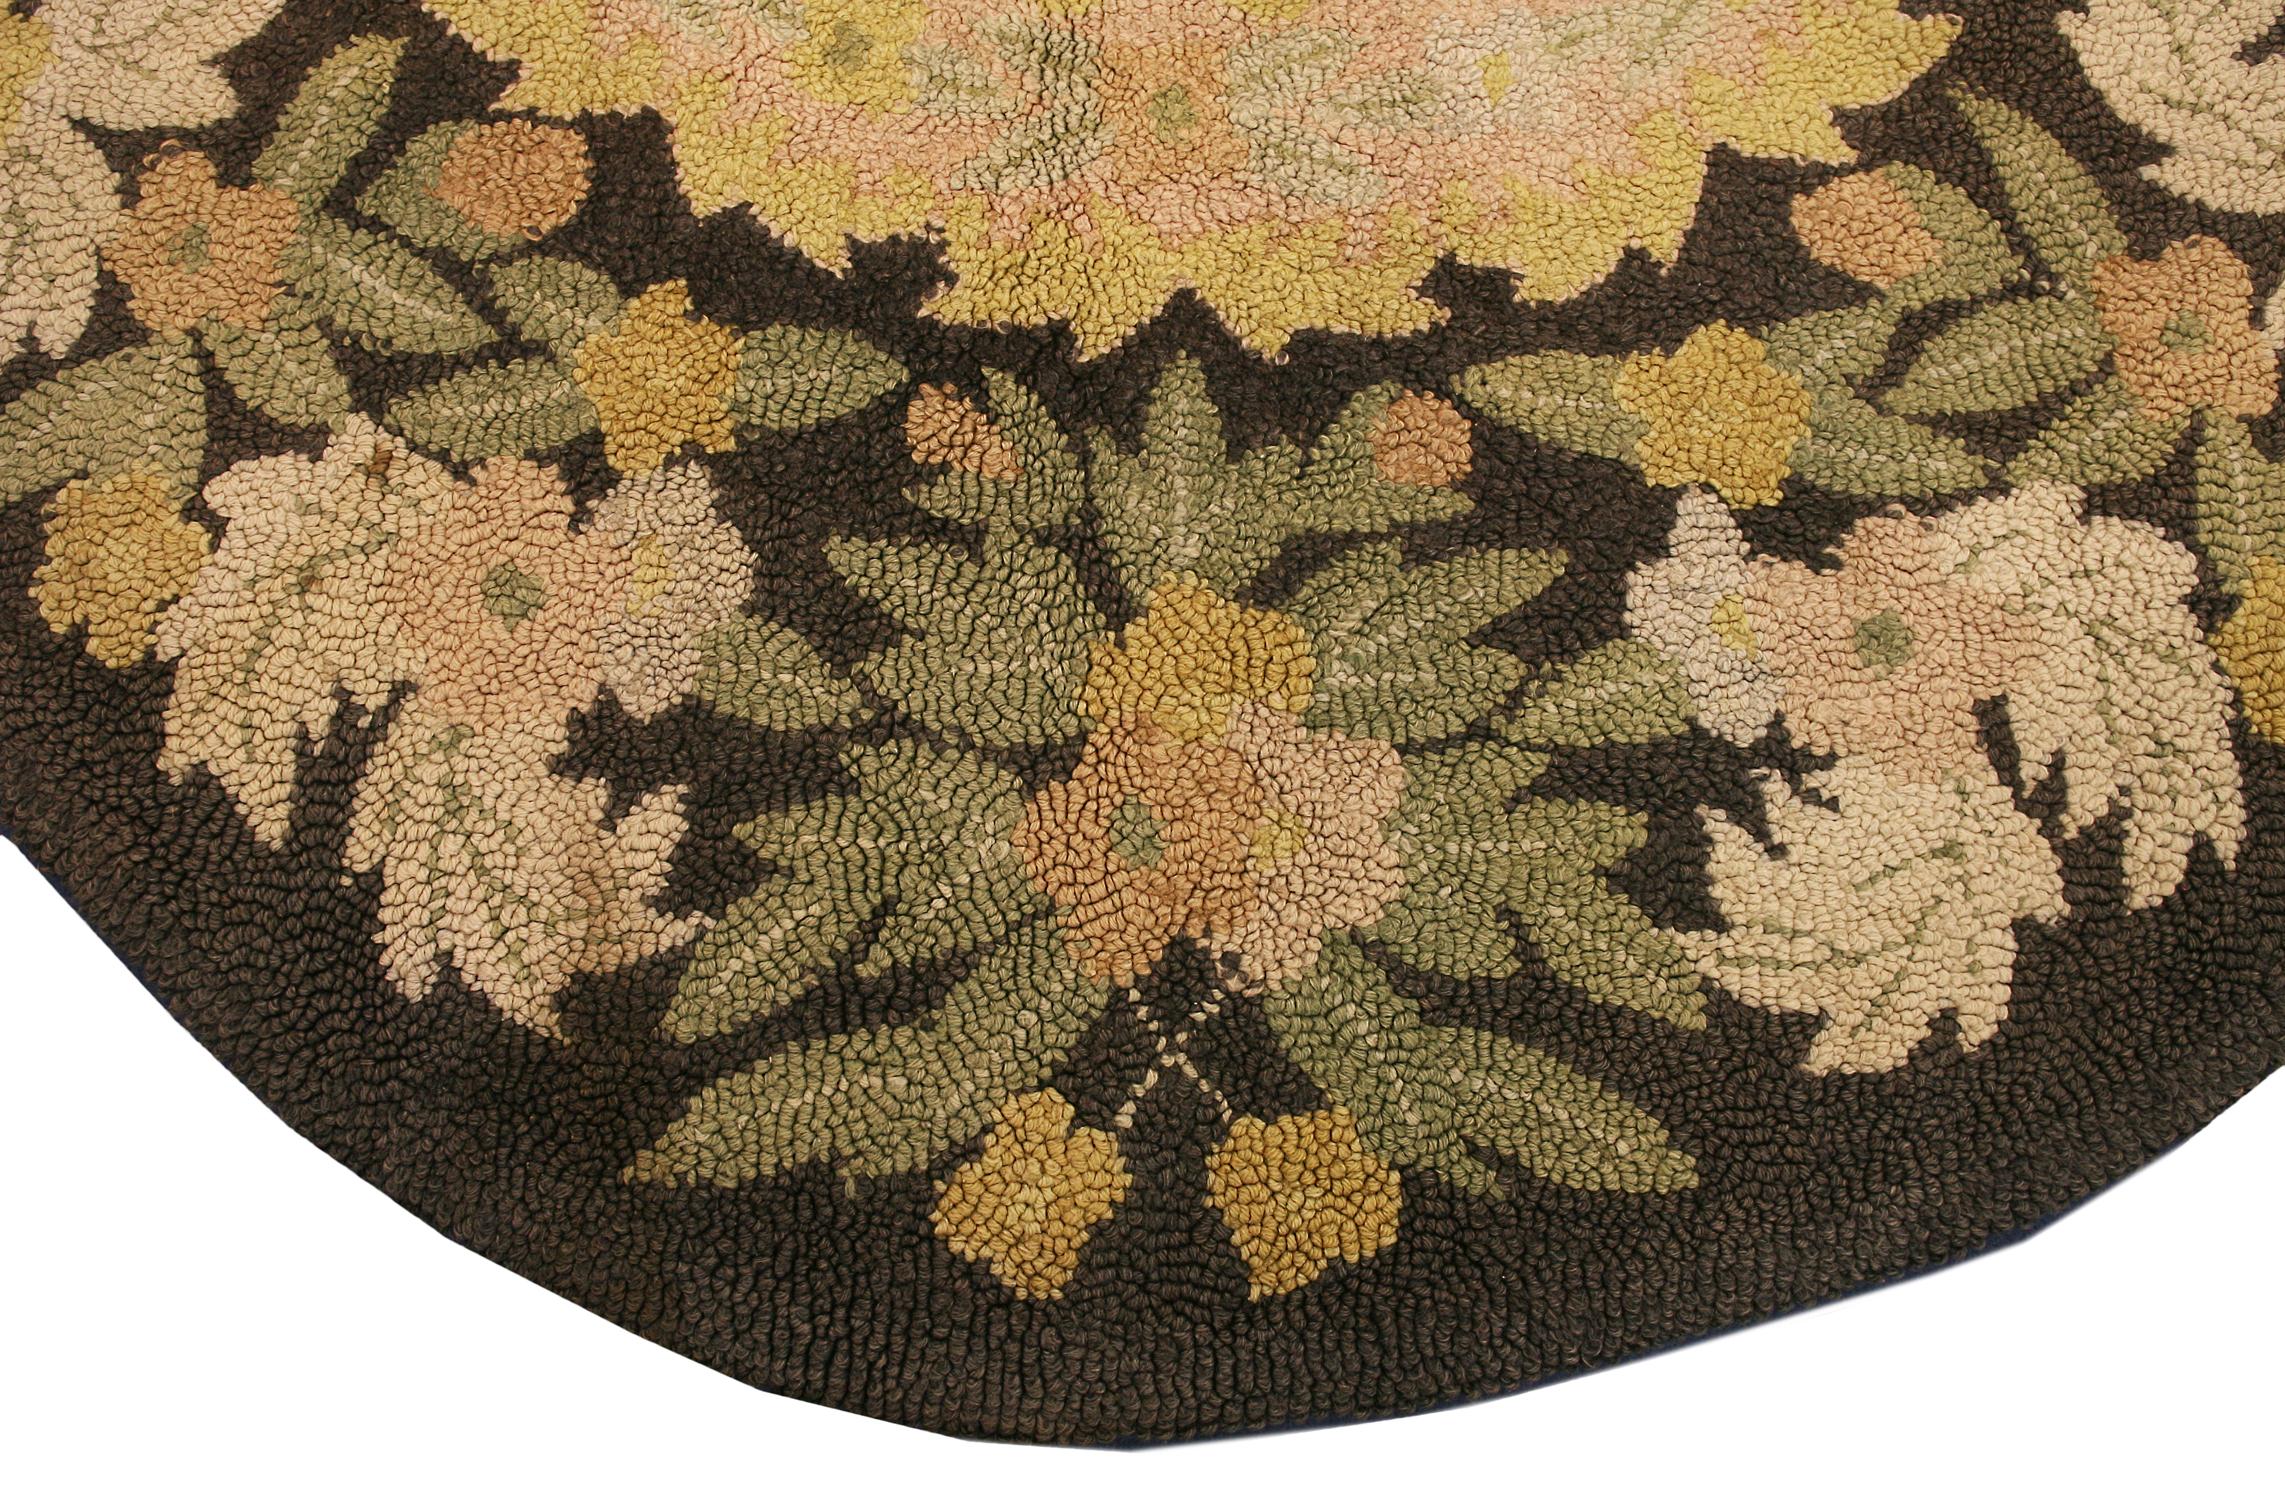 Other Antique American Oval Shape Hook Floral Field Rug, ca. 1920 For Sale